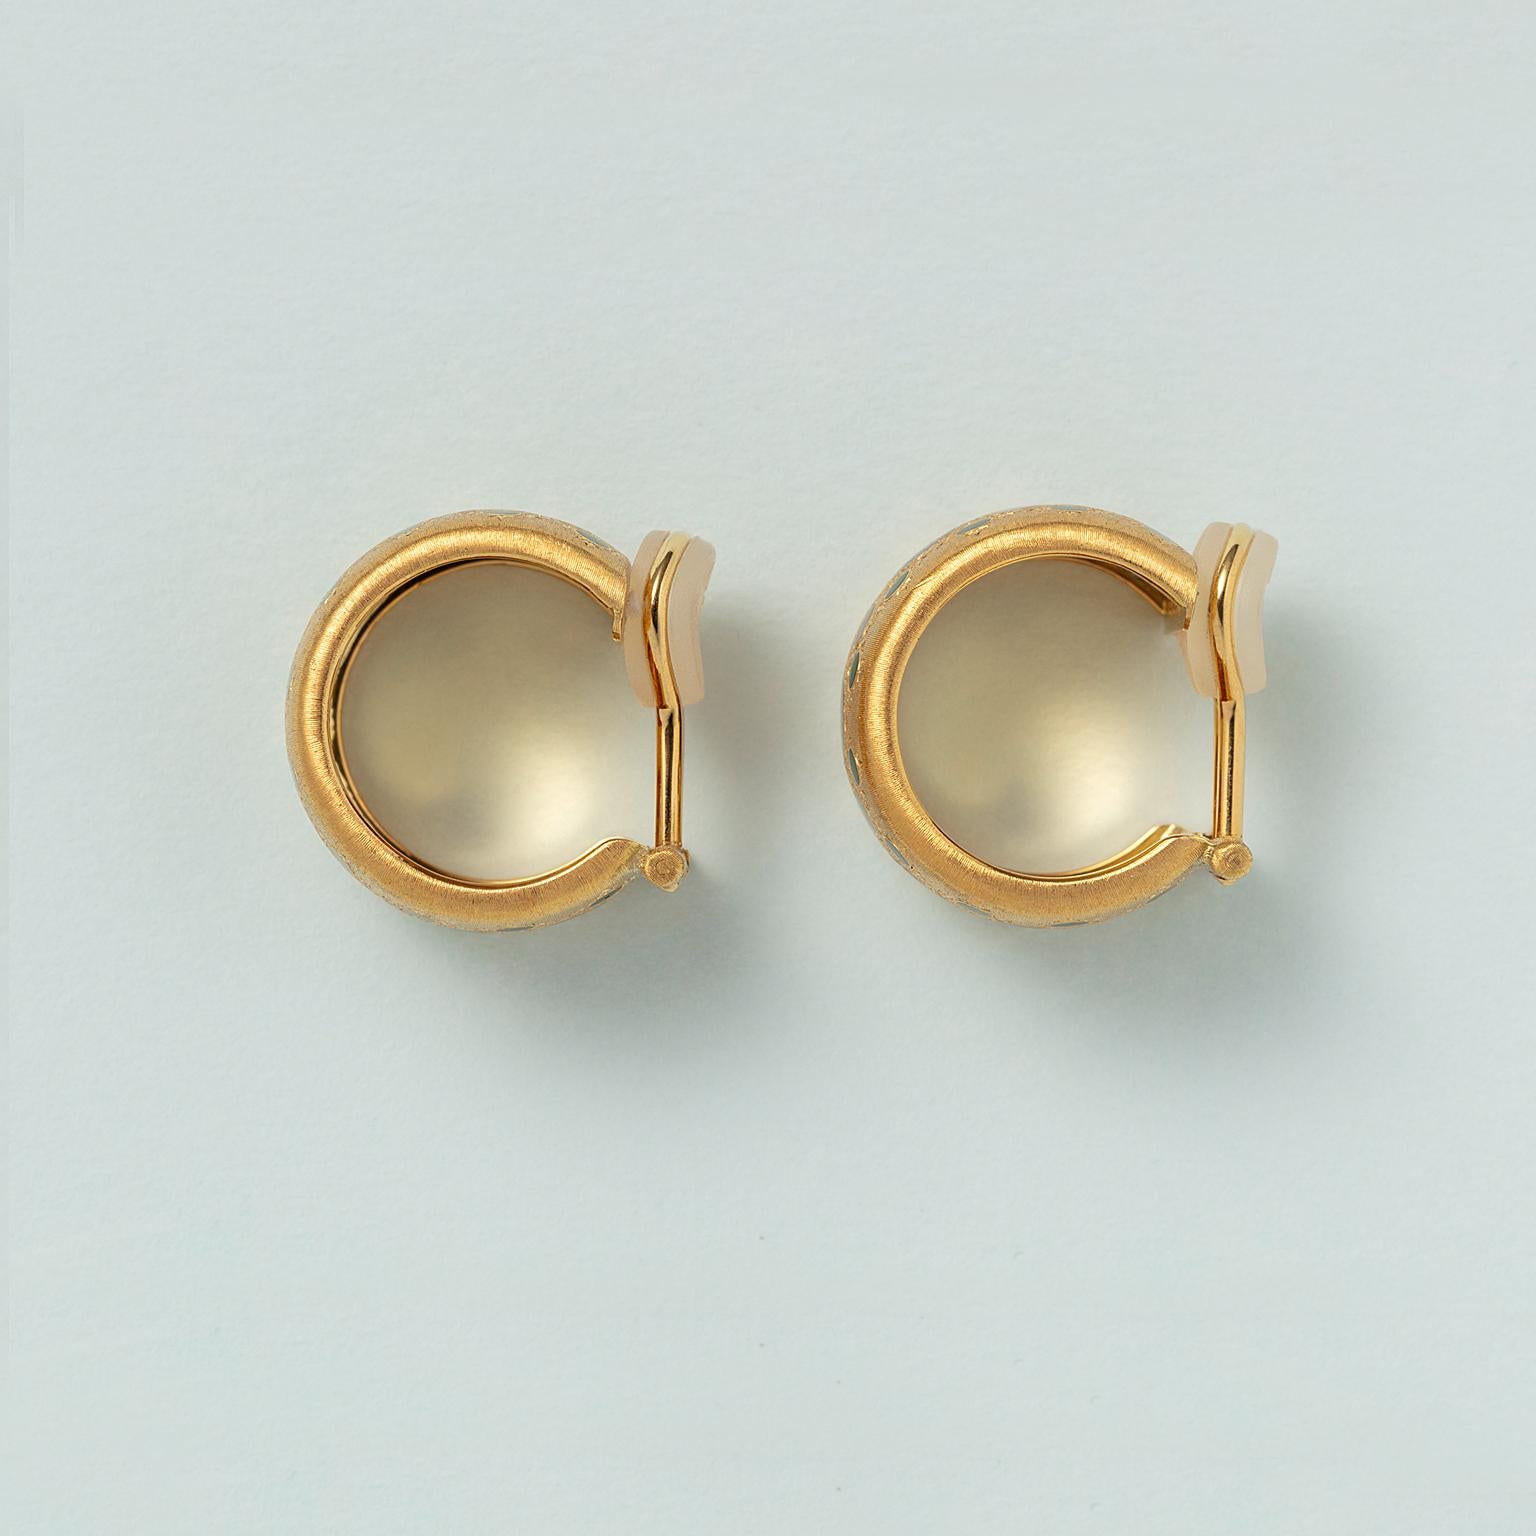 A pair of 18 Carat Gold Buccellati Ear Clips with Enamel In Good Condition For Sale In Amsterdam, NL